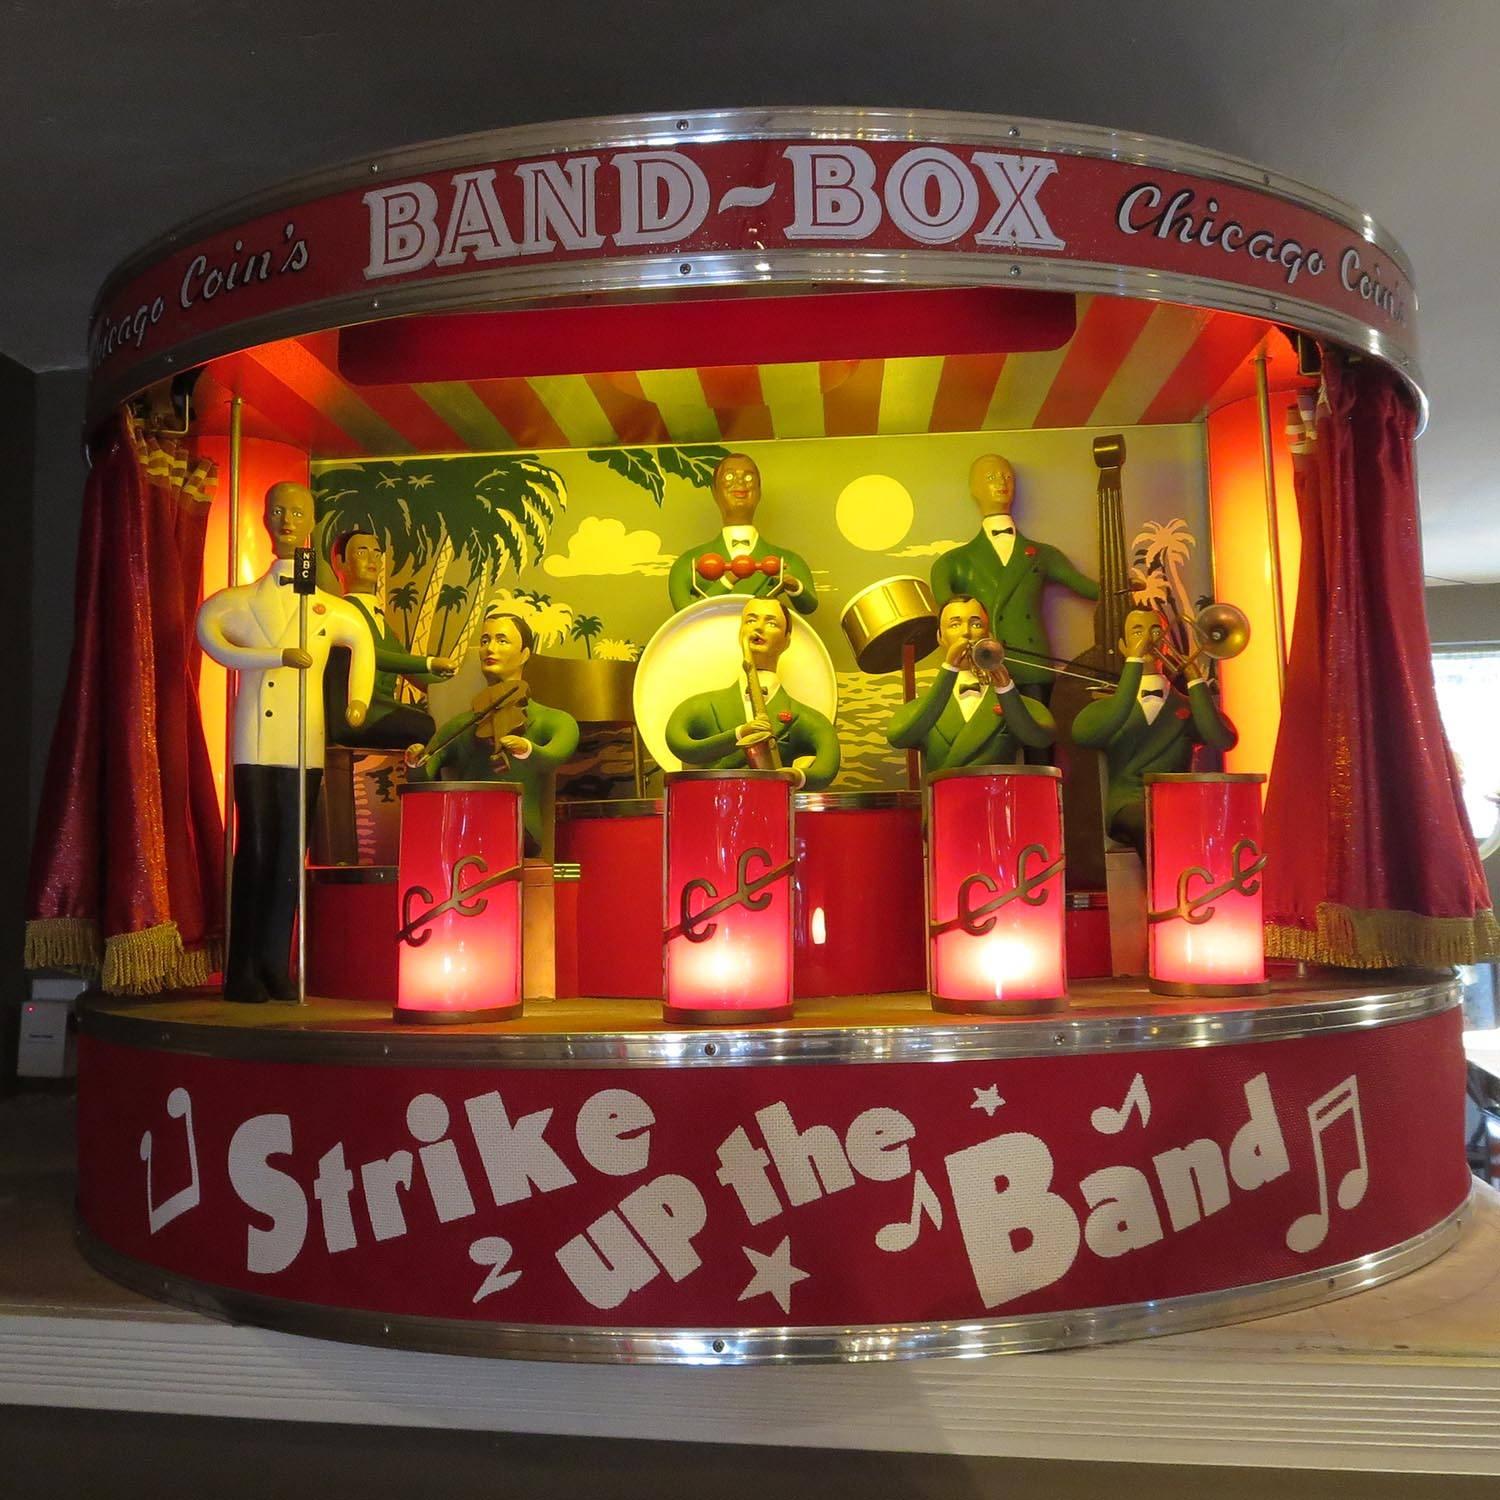 The Band Box, a mini orchestra in a cabinet, was developed to help bar owners collect more jukebox revenue. The cabinet hung on the wall, lights out and curtains closed. As soon as a song was played on the jukebox, the curtains opened, lights came